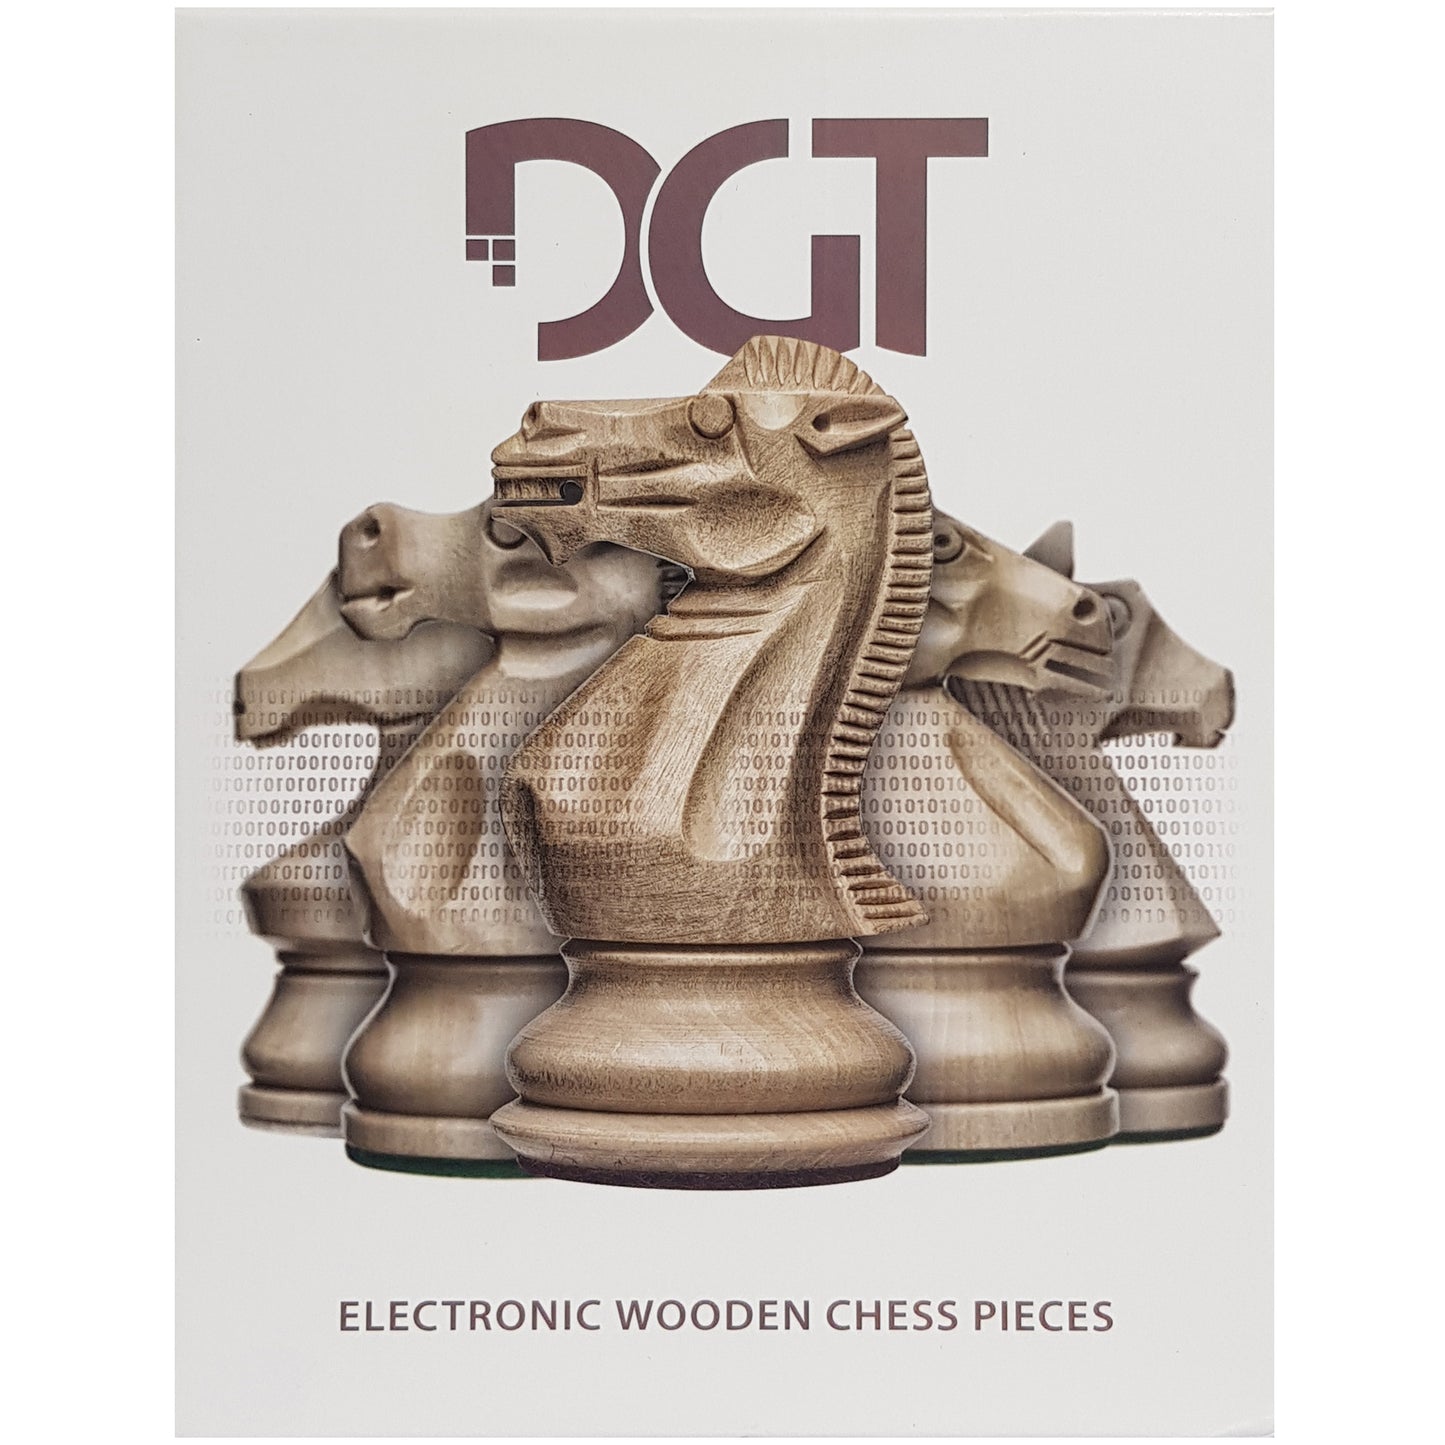 DGT Royal Wooden Electronic Chess Pieces